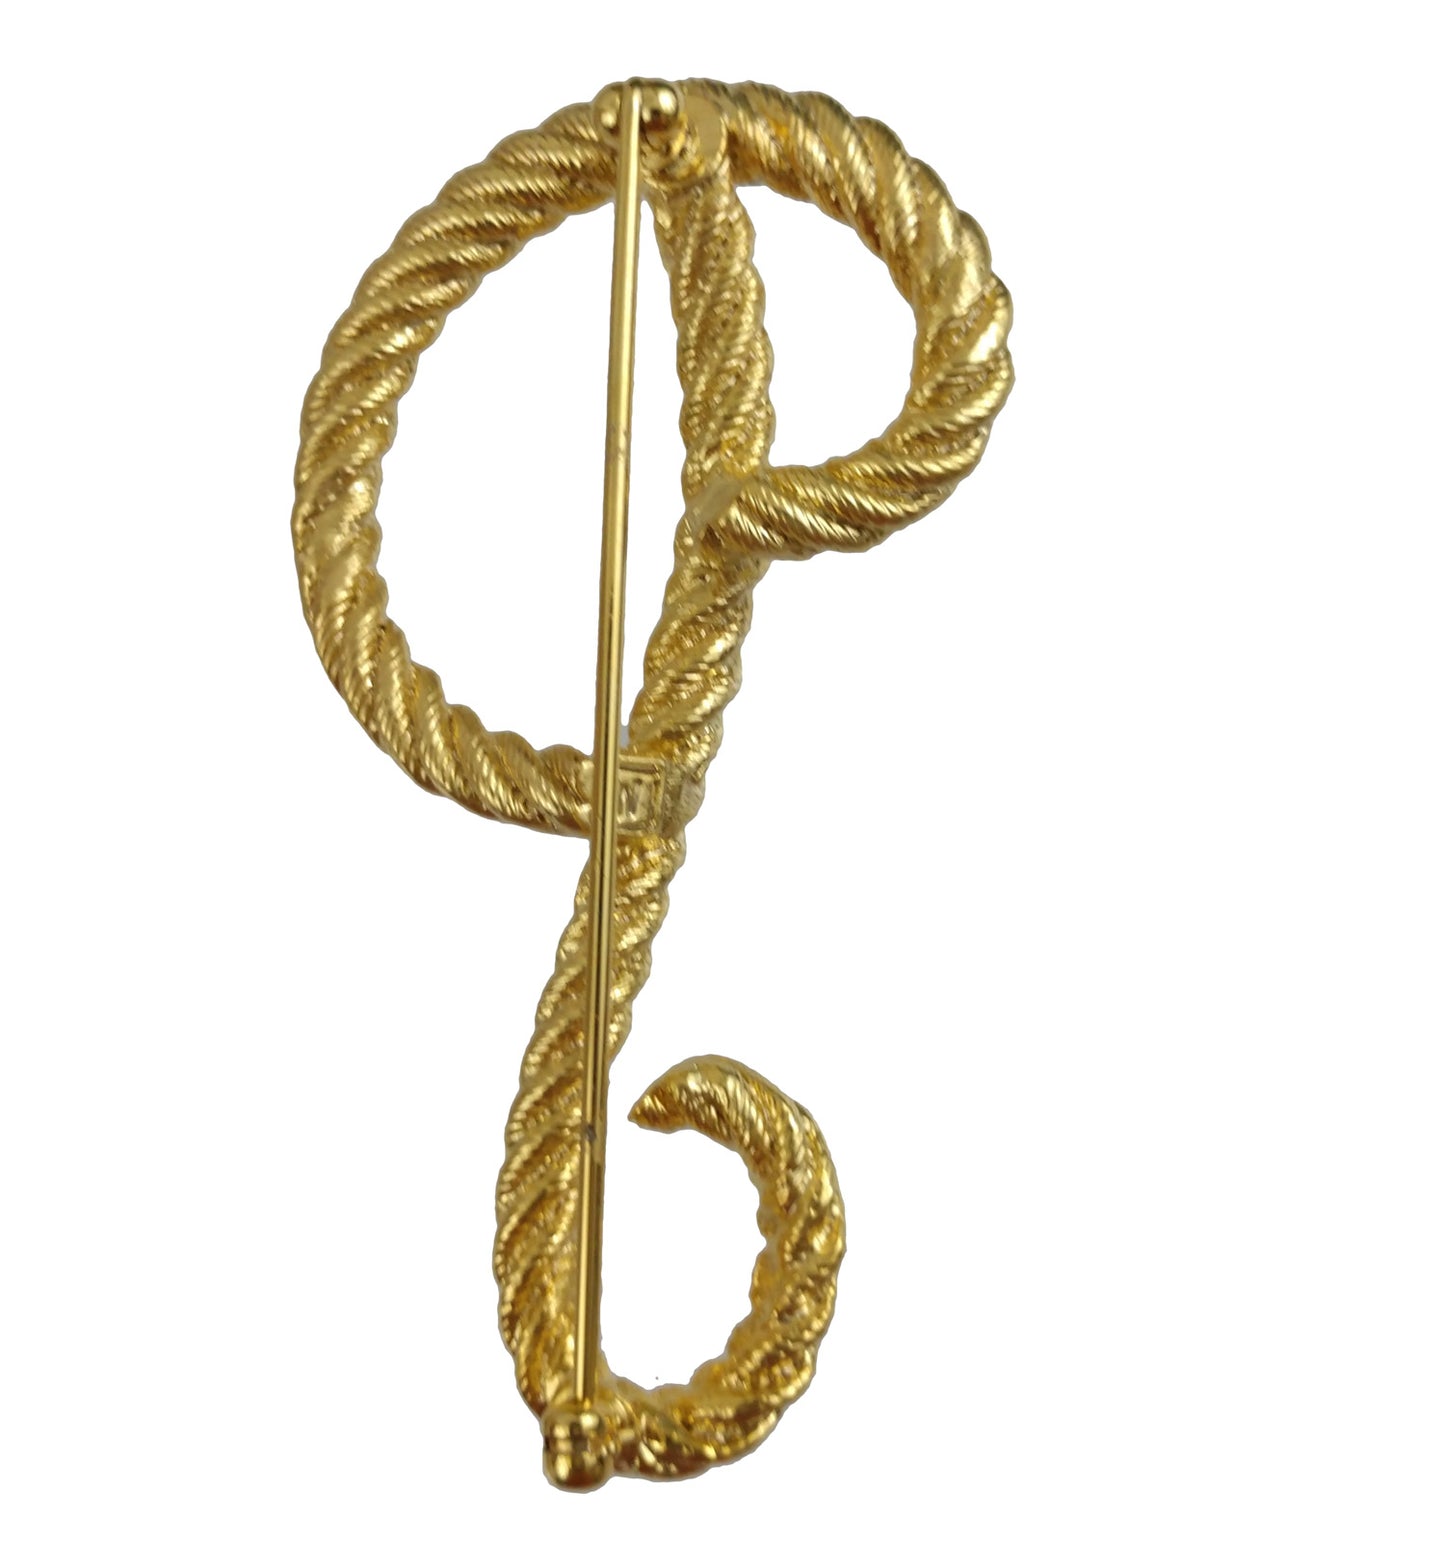 Large Script Gold Tone Twisted Rope Initial "P" Pin Brooch 2 1/2"